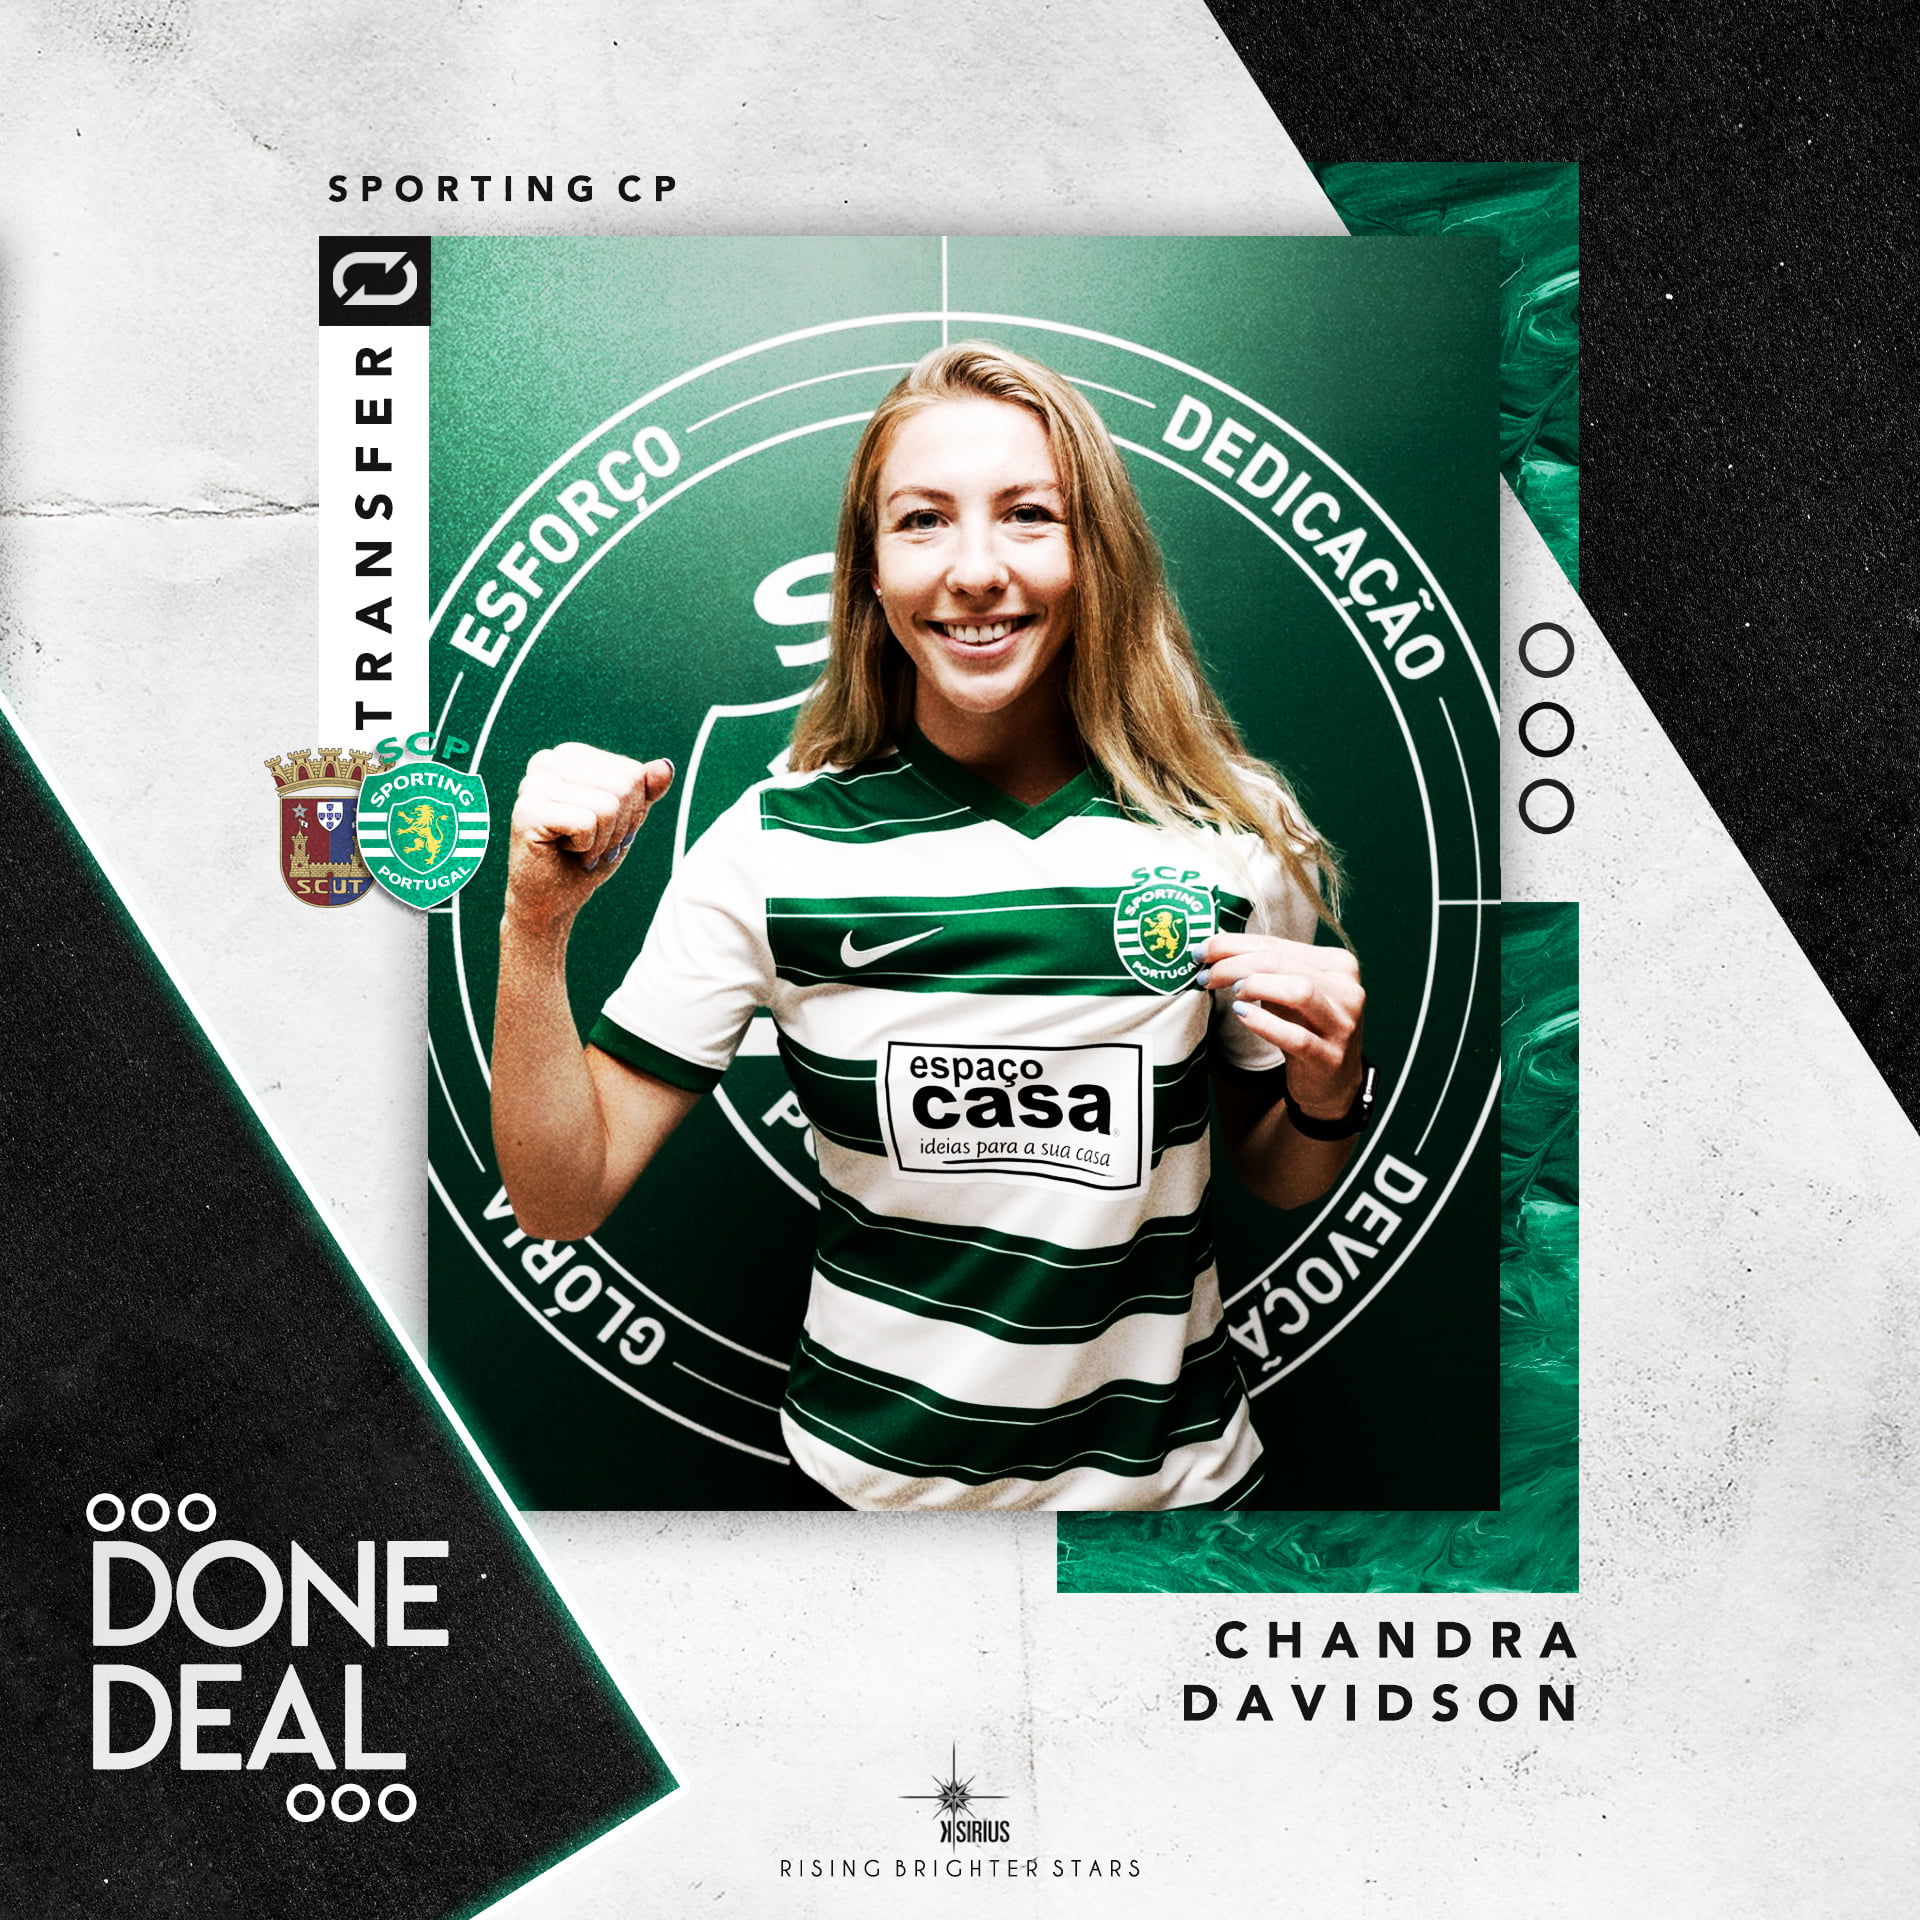 Signing: Chandra Davidson with Sporting C.P.